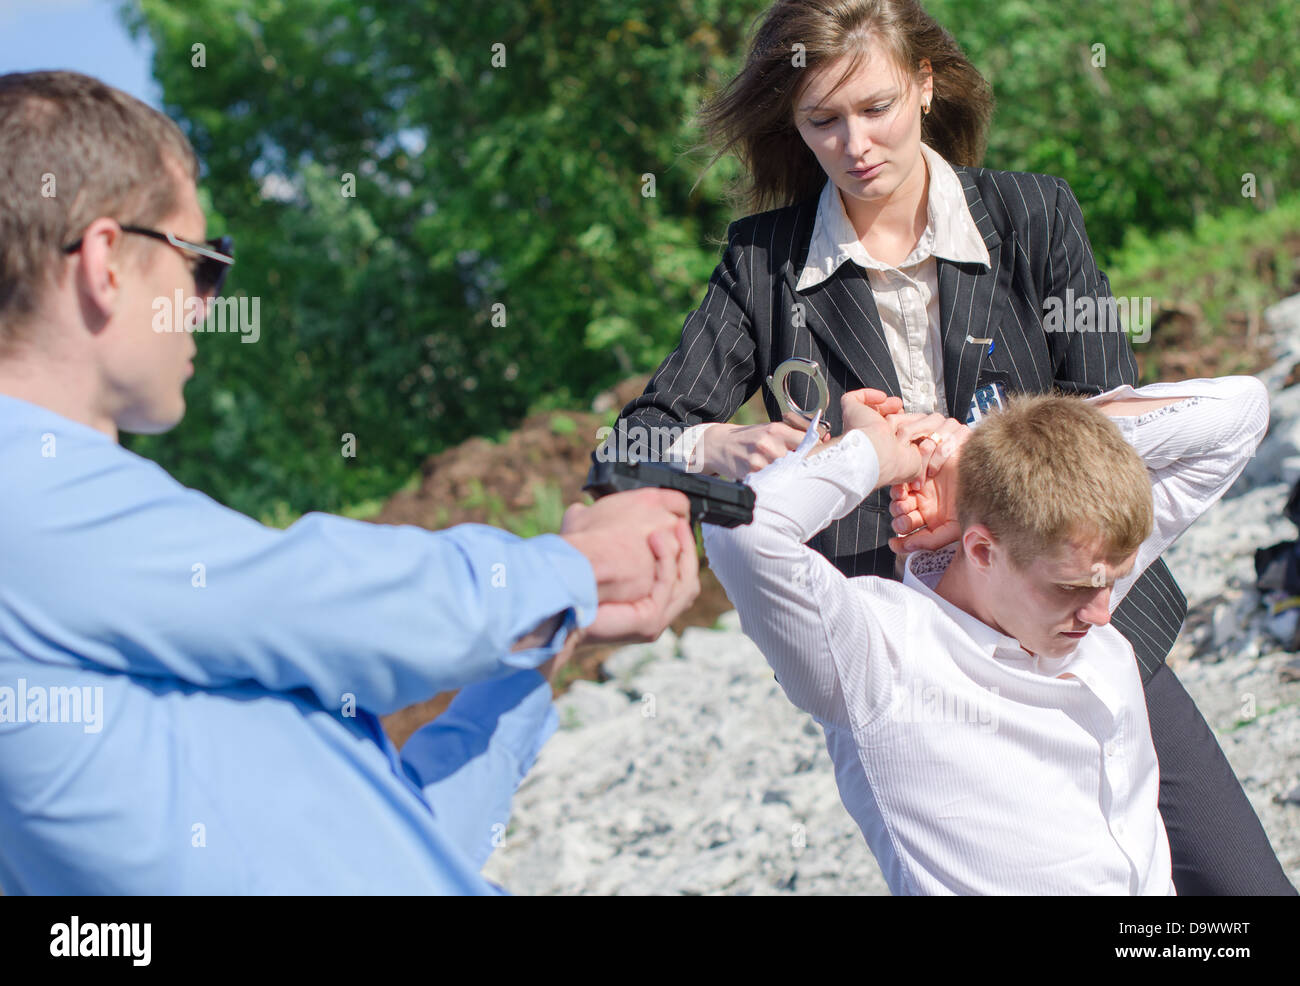 Two FBI agents conduct arrest of an offender Stock Photo